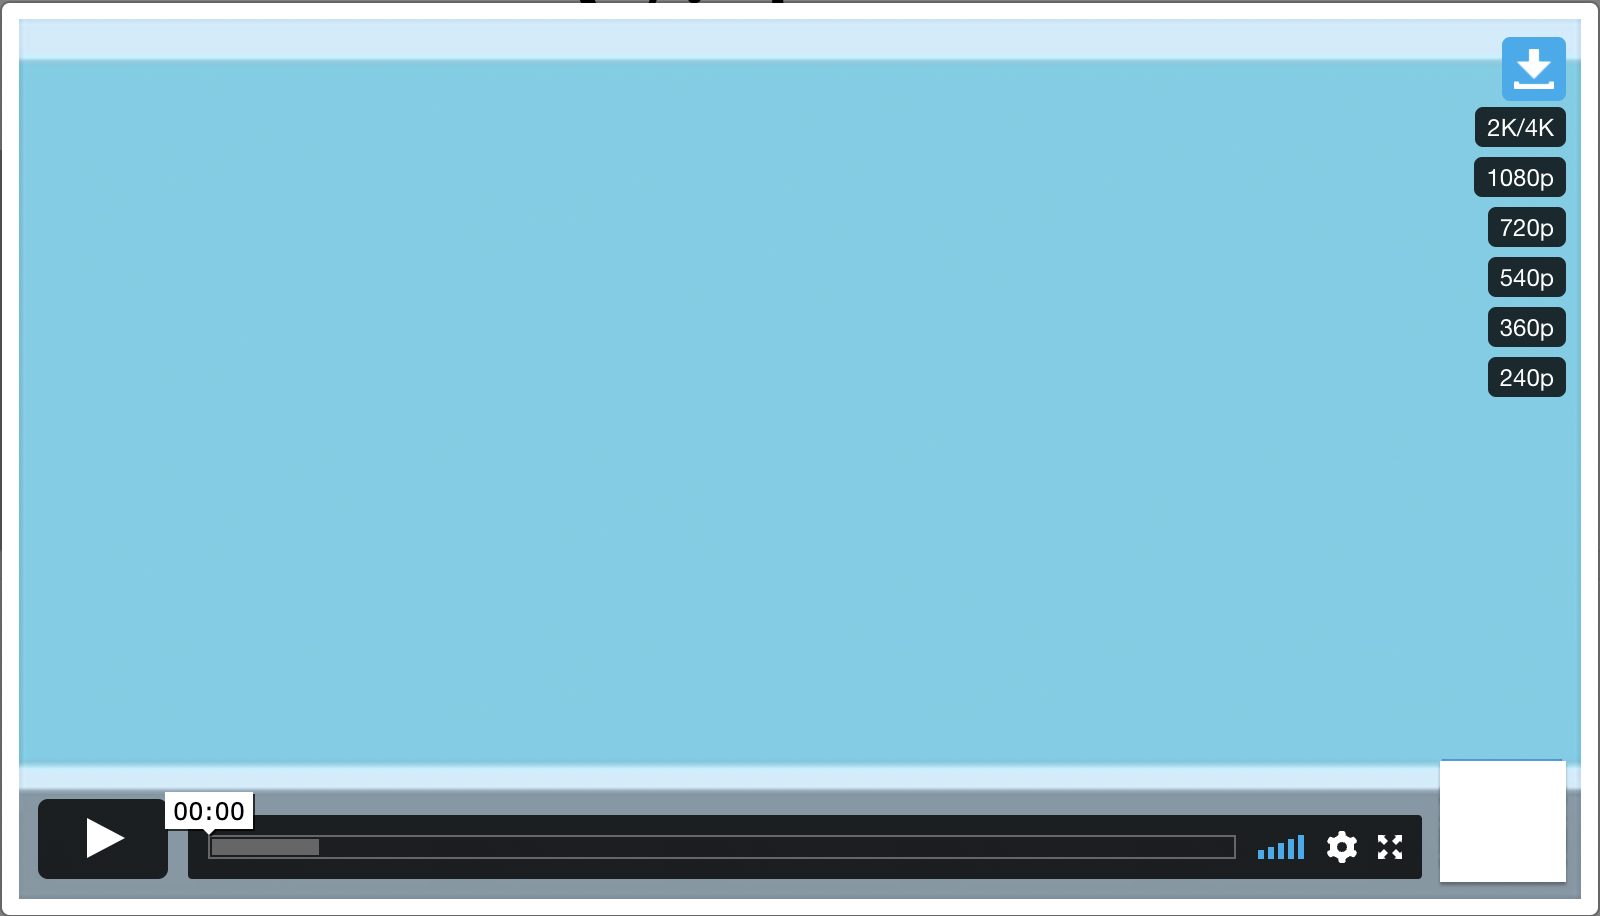 Move the mouse to the video screen, select a video quality and click the download button.